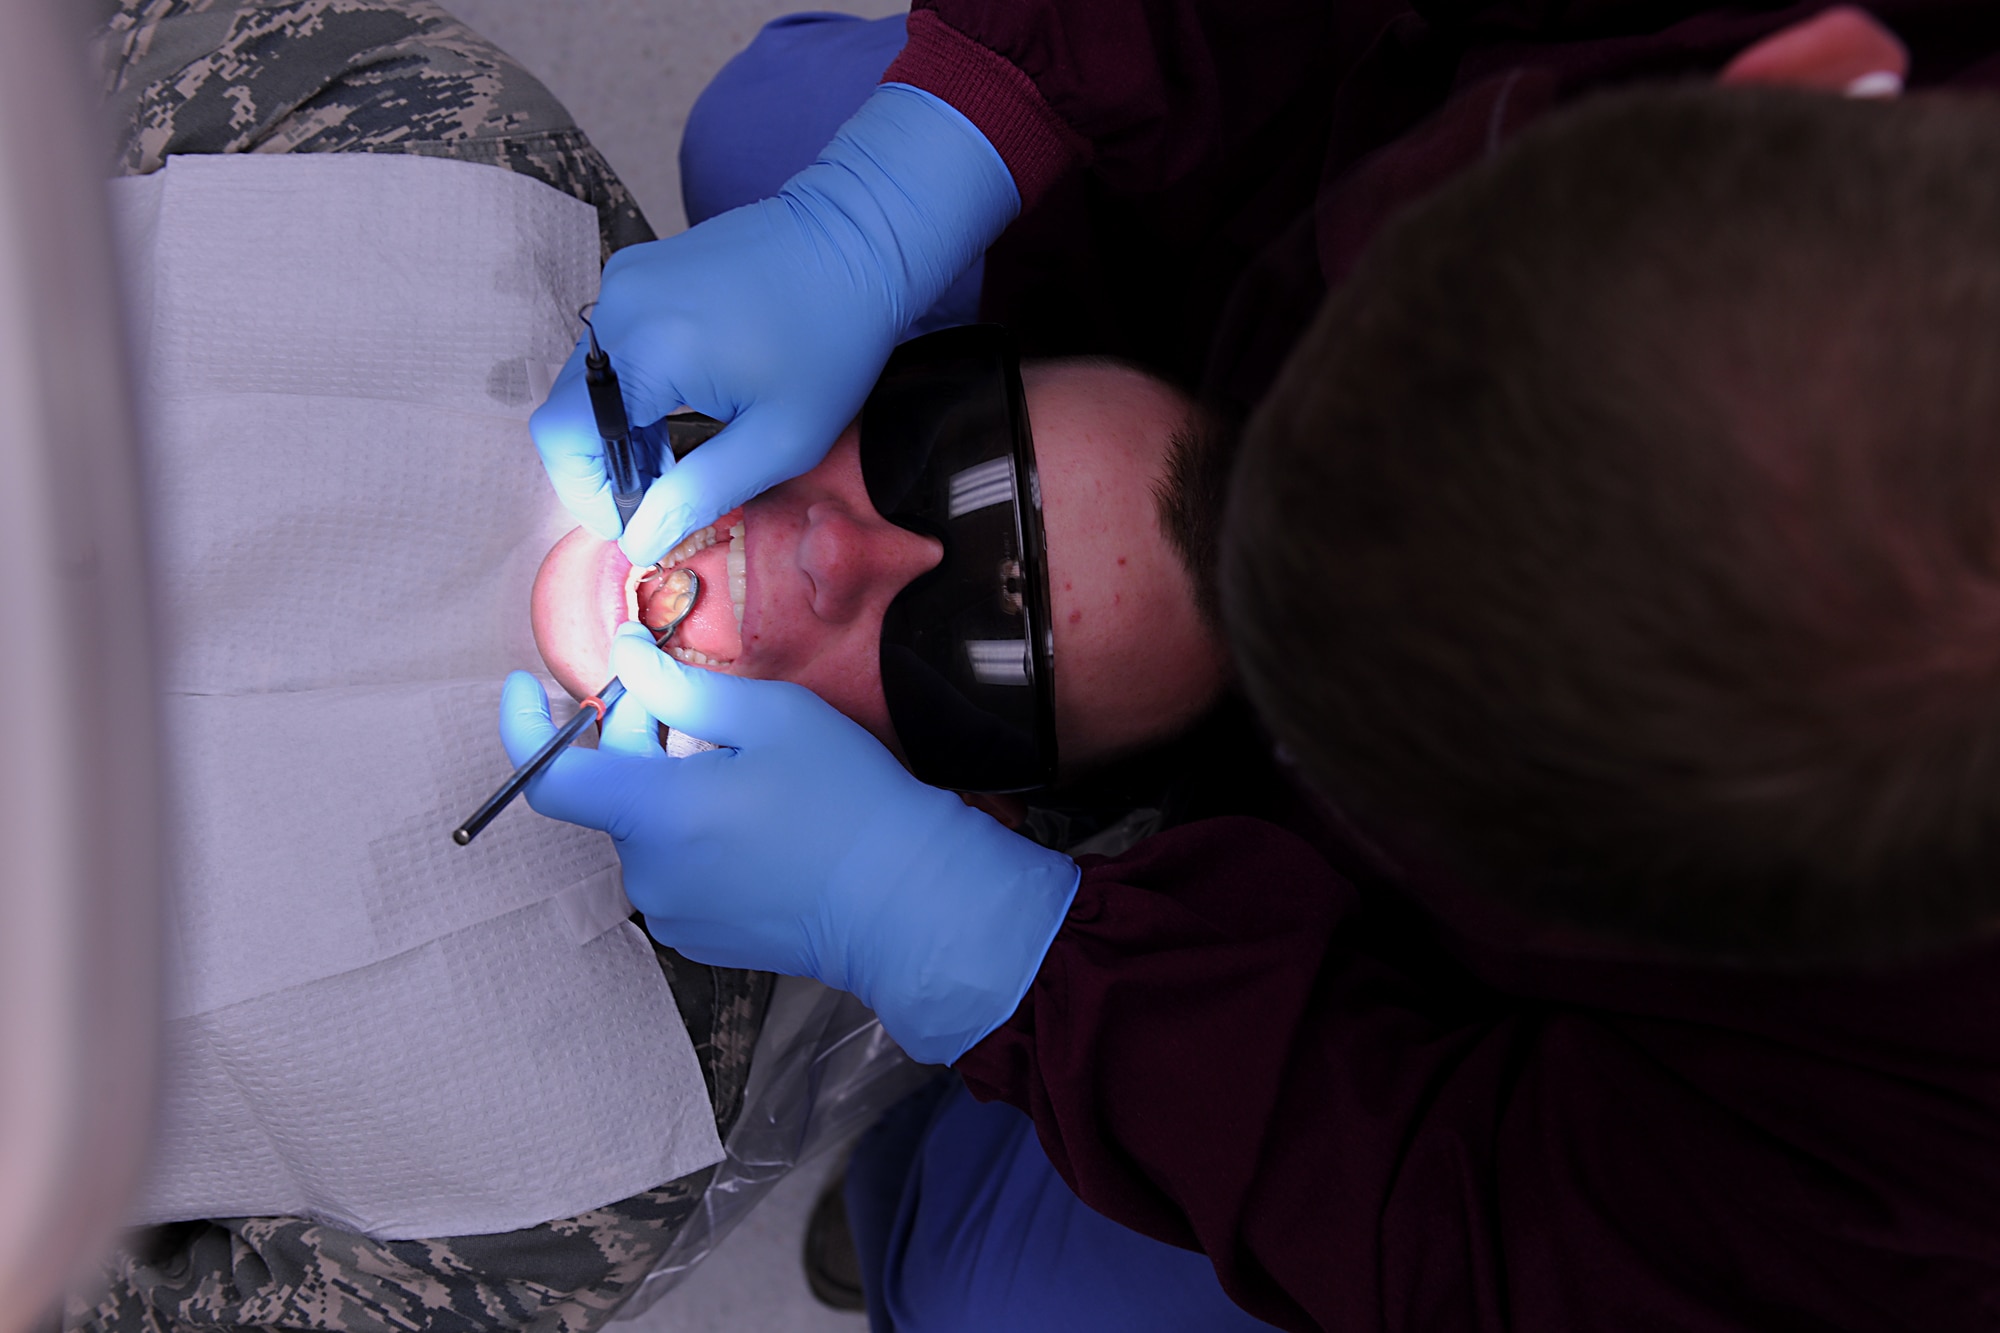 MOODY AIR FORCE BASE, Ga. -- Staff Sgt. Steven Smith, 23rd Aeromedical Dental Squadron dental technician, uses a dental mirror and dental probe for a routine dental cleaning on Airman 1st Class Edward Huffman, 822nd Security Forces Squadron member, here May 12. The dental mirror is used to separate the cheeks permitting the technician to see inside of the oral cavity, while the dental probe explores the holes, grooves and fissures of tooth surfaces to locate cavities. (U.S. Air Force photo by Airman 1st Class Joshua Green/RELEASED)